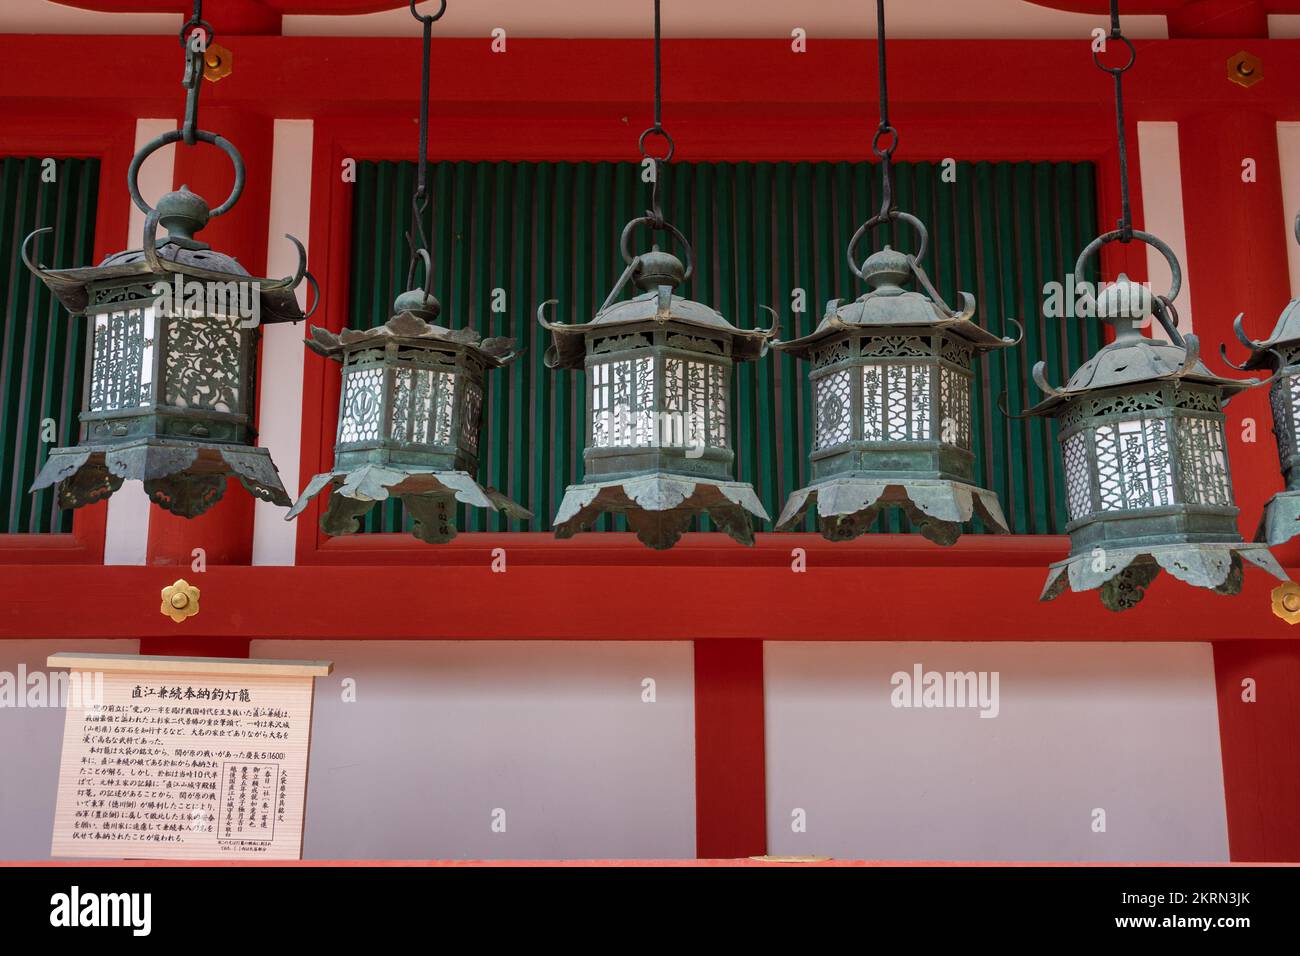 Lanterns in the temple, Japan Stock Photo